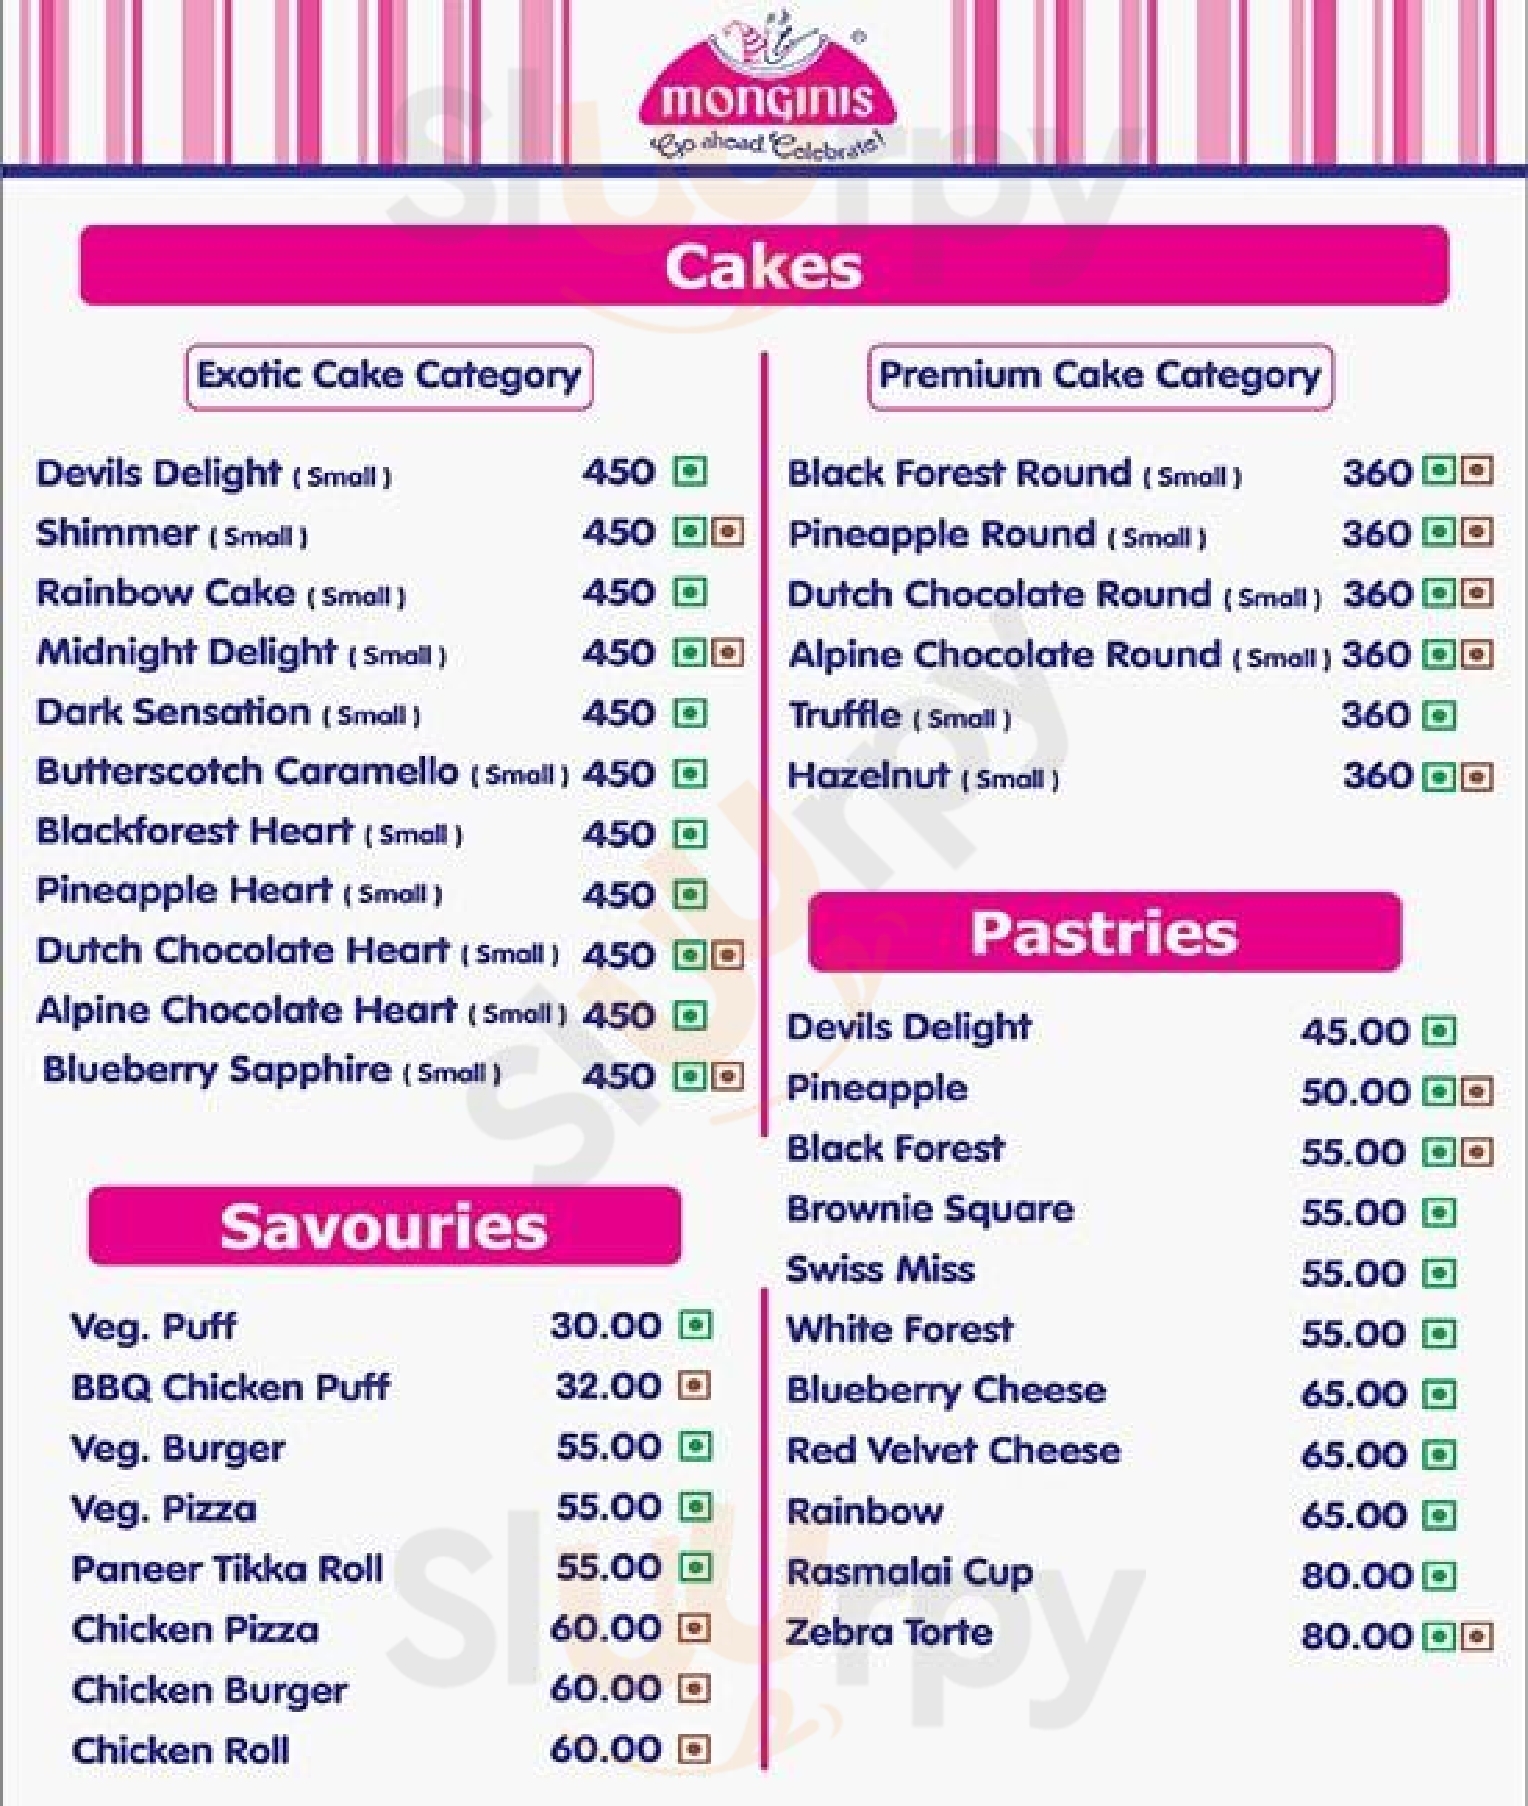 Home Delivery Call @ 8092361977 - Monginis Cake Shop Fatwah | Facebook